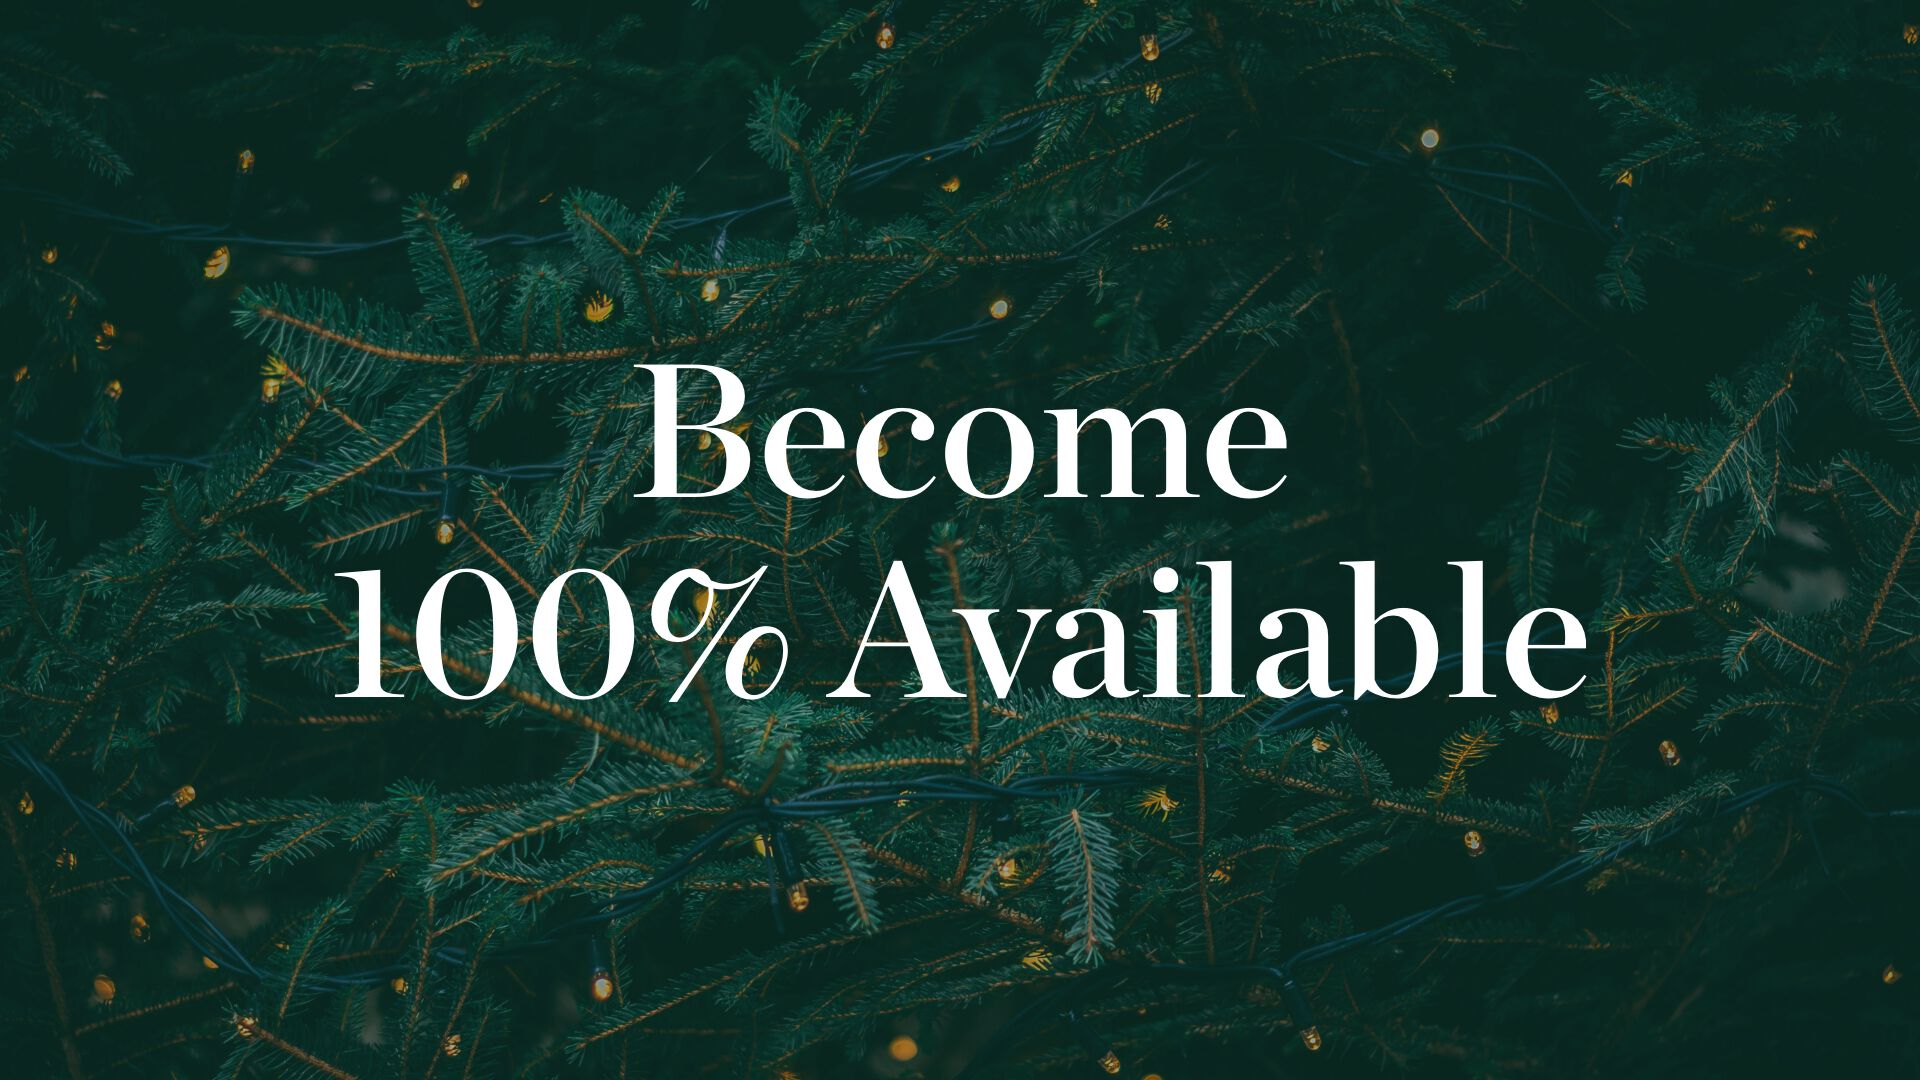 Become 100% Available